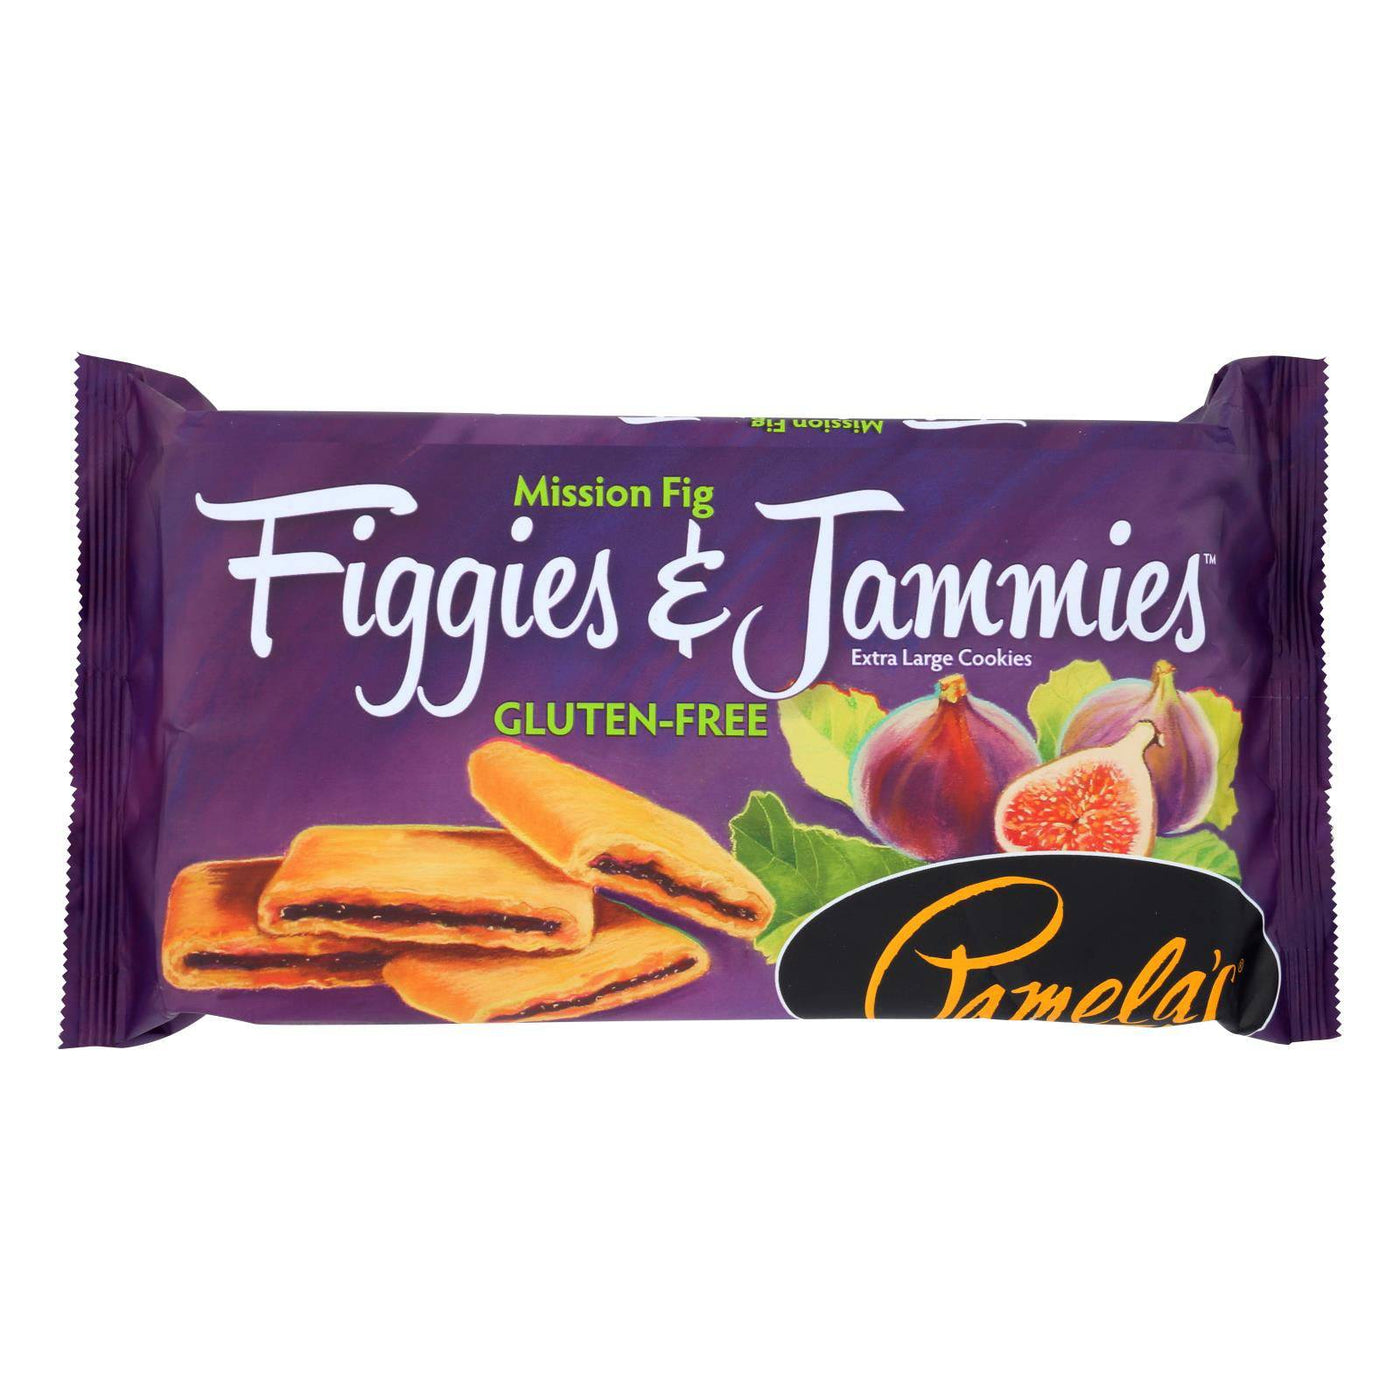 Buy Pamela's Products - Gluten Free Cookies Mission Fig - Figgies And Jammies - Case Of 6 - 9 Oz.  at OnlyNaturals.us